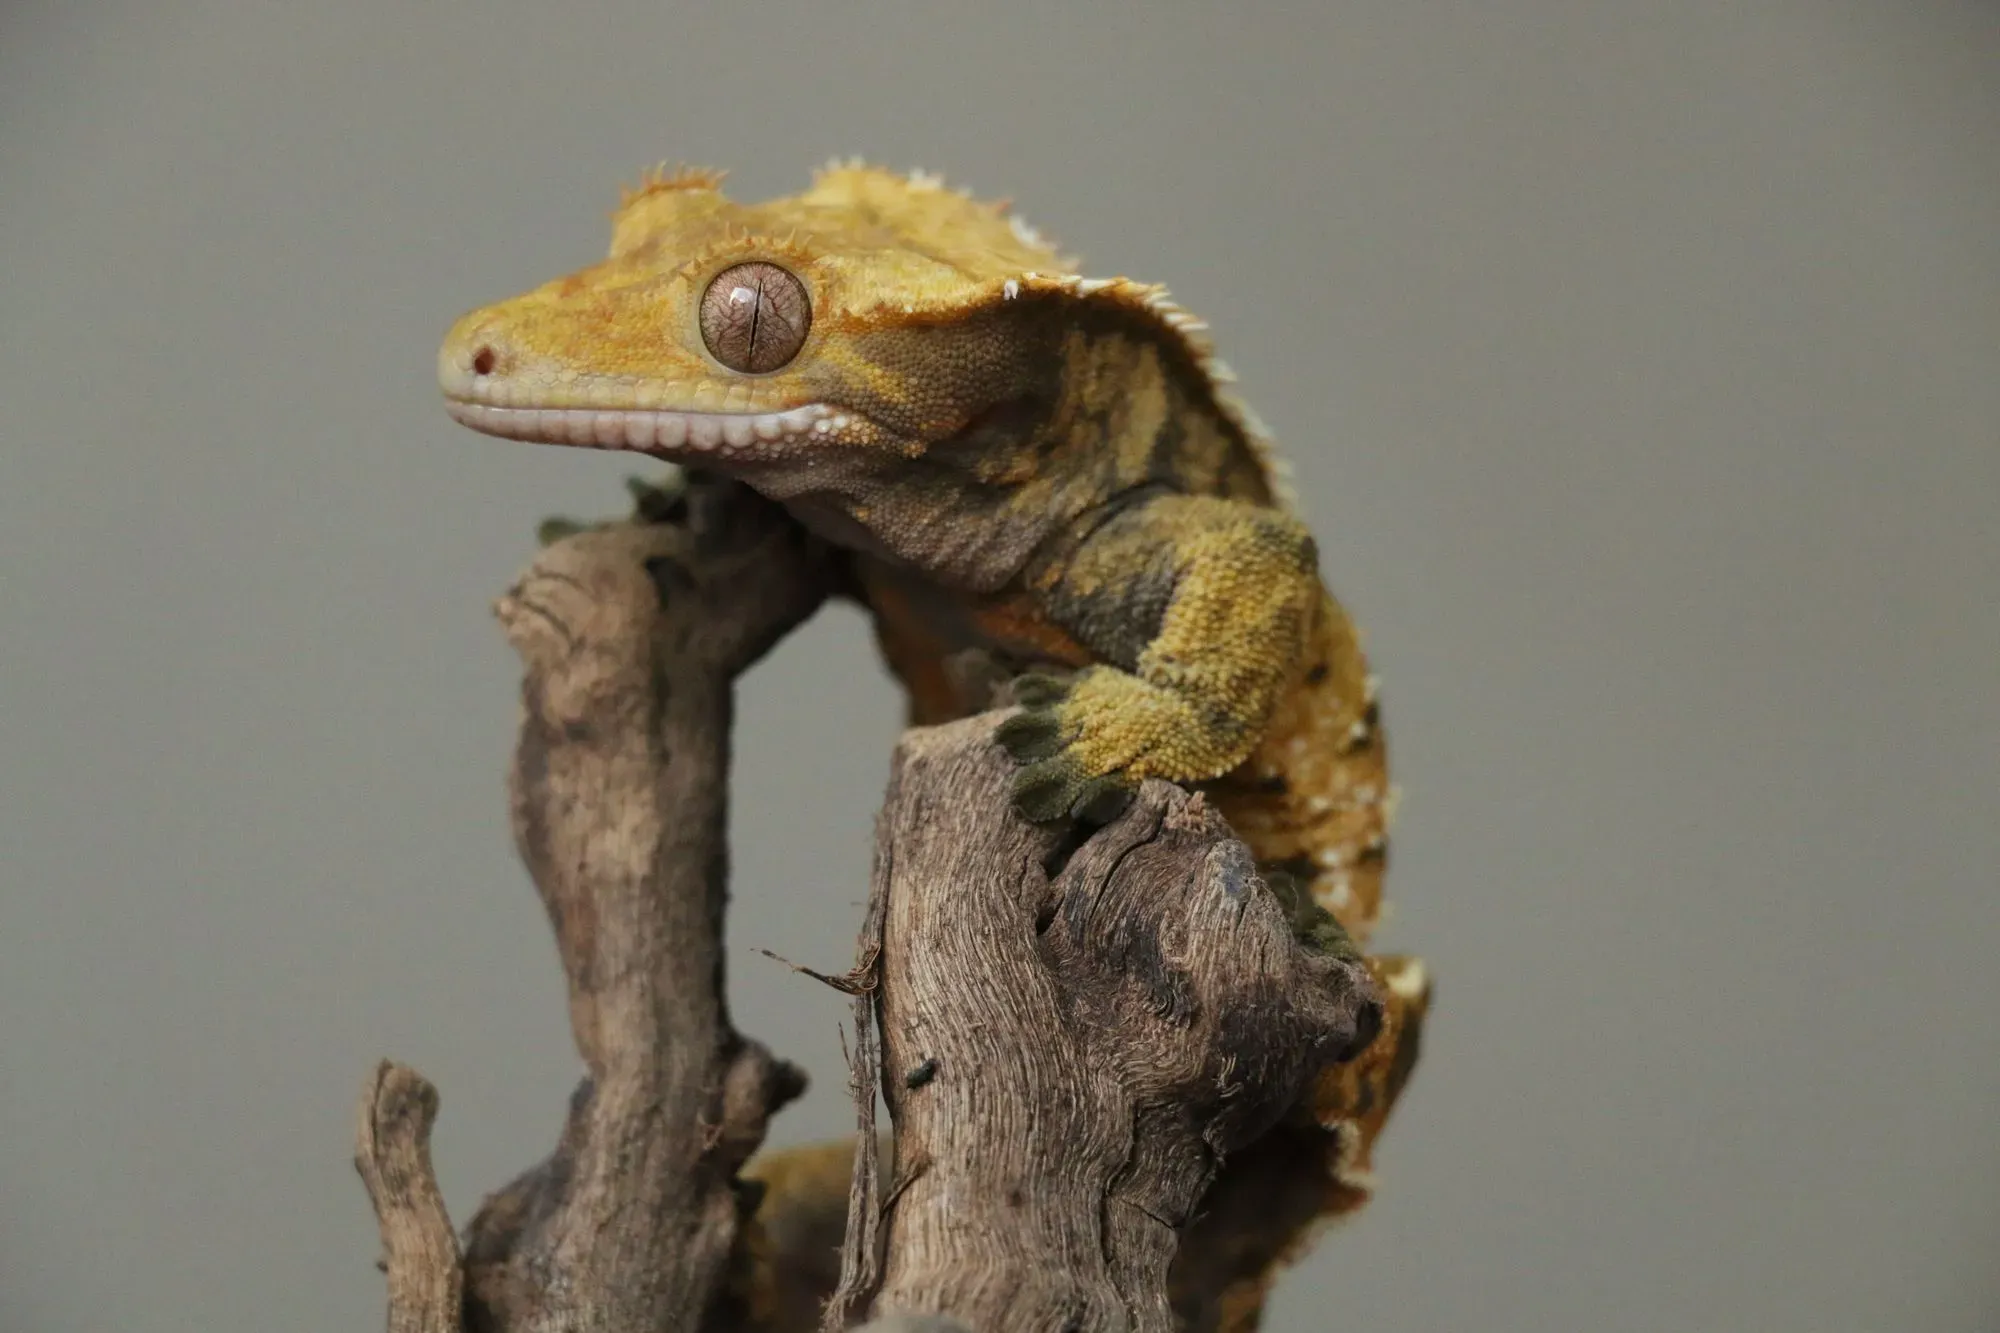 Check out facts on the crested gecko habitat here.